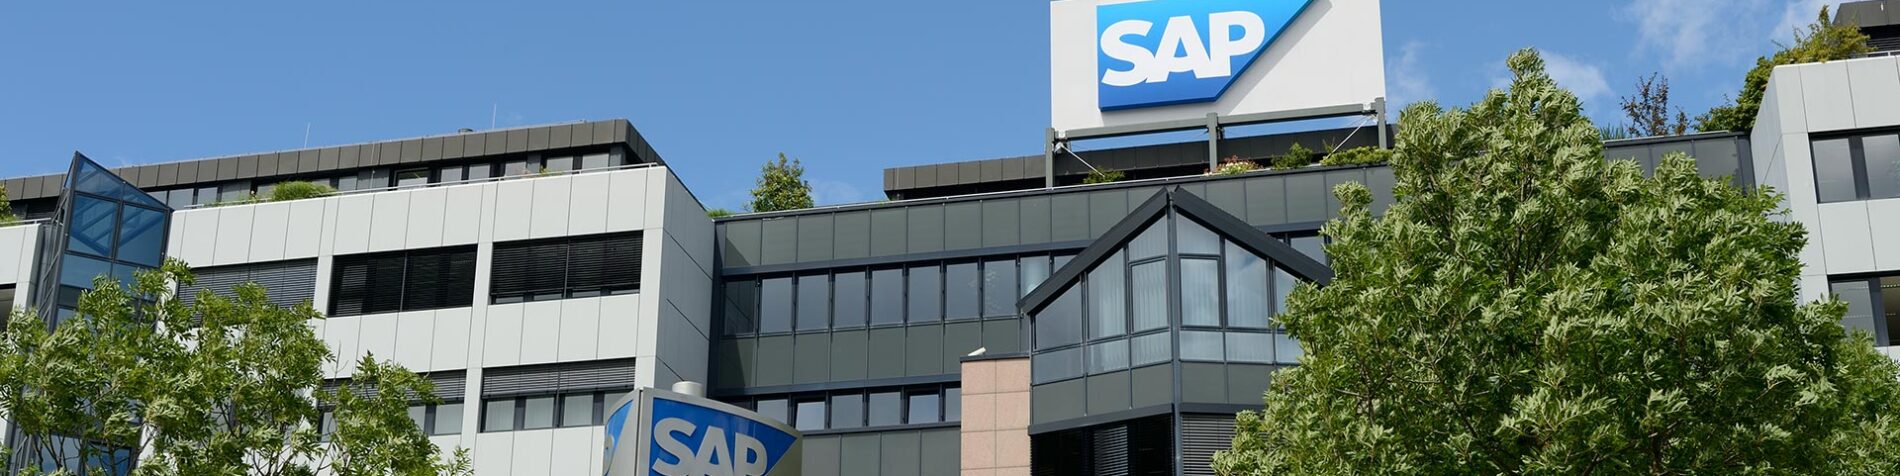 SAP and Verizon Expand Agreement to Jointly Market Verizon’s Managed Mobility Platform